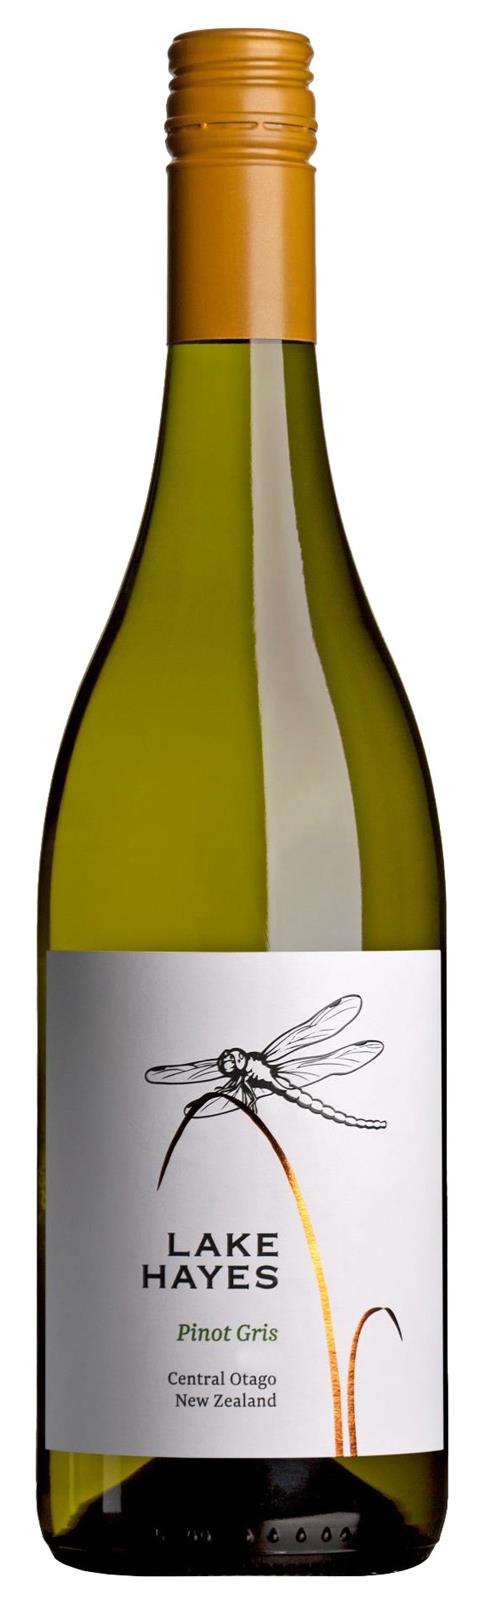 Lake Hayes Central Otago Pinot Gris 2019